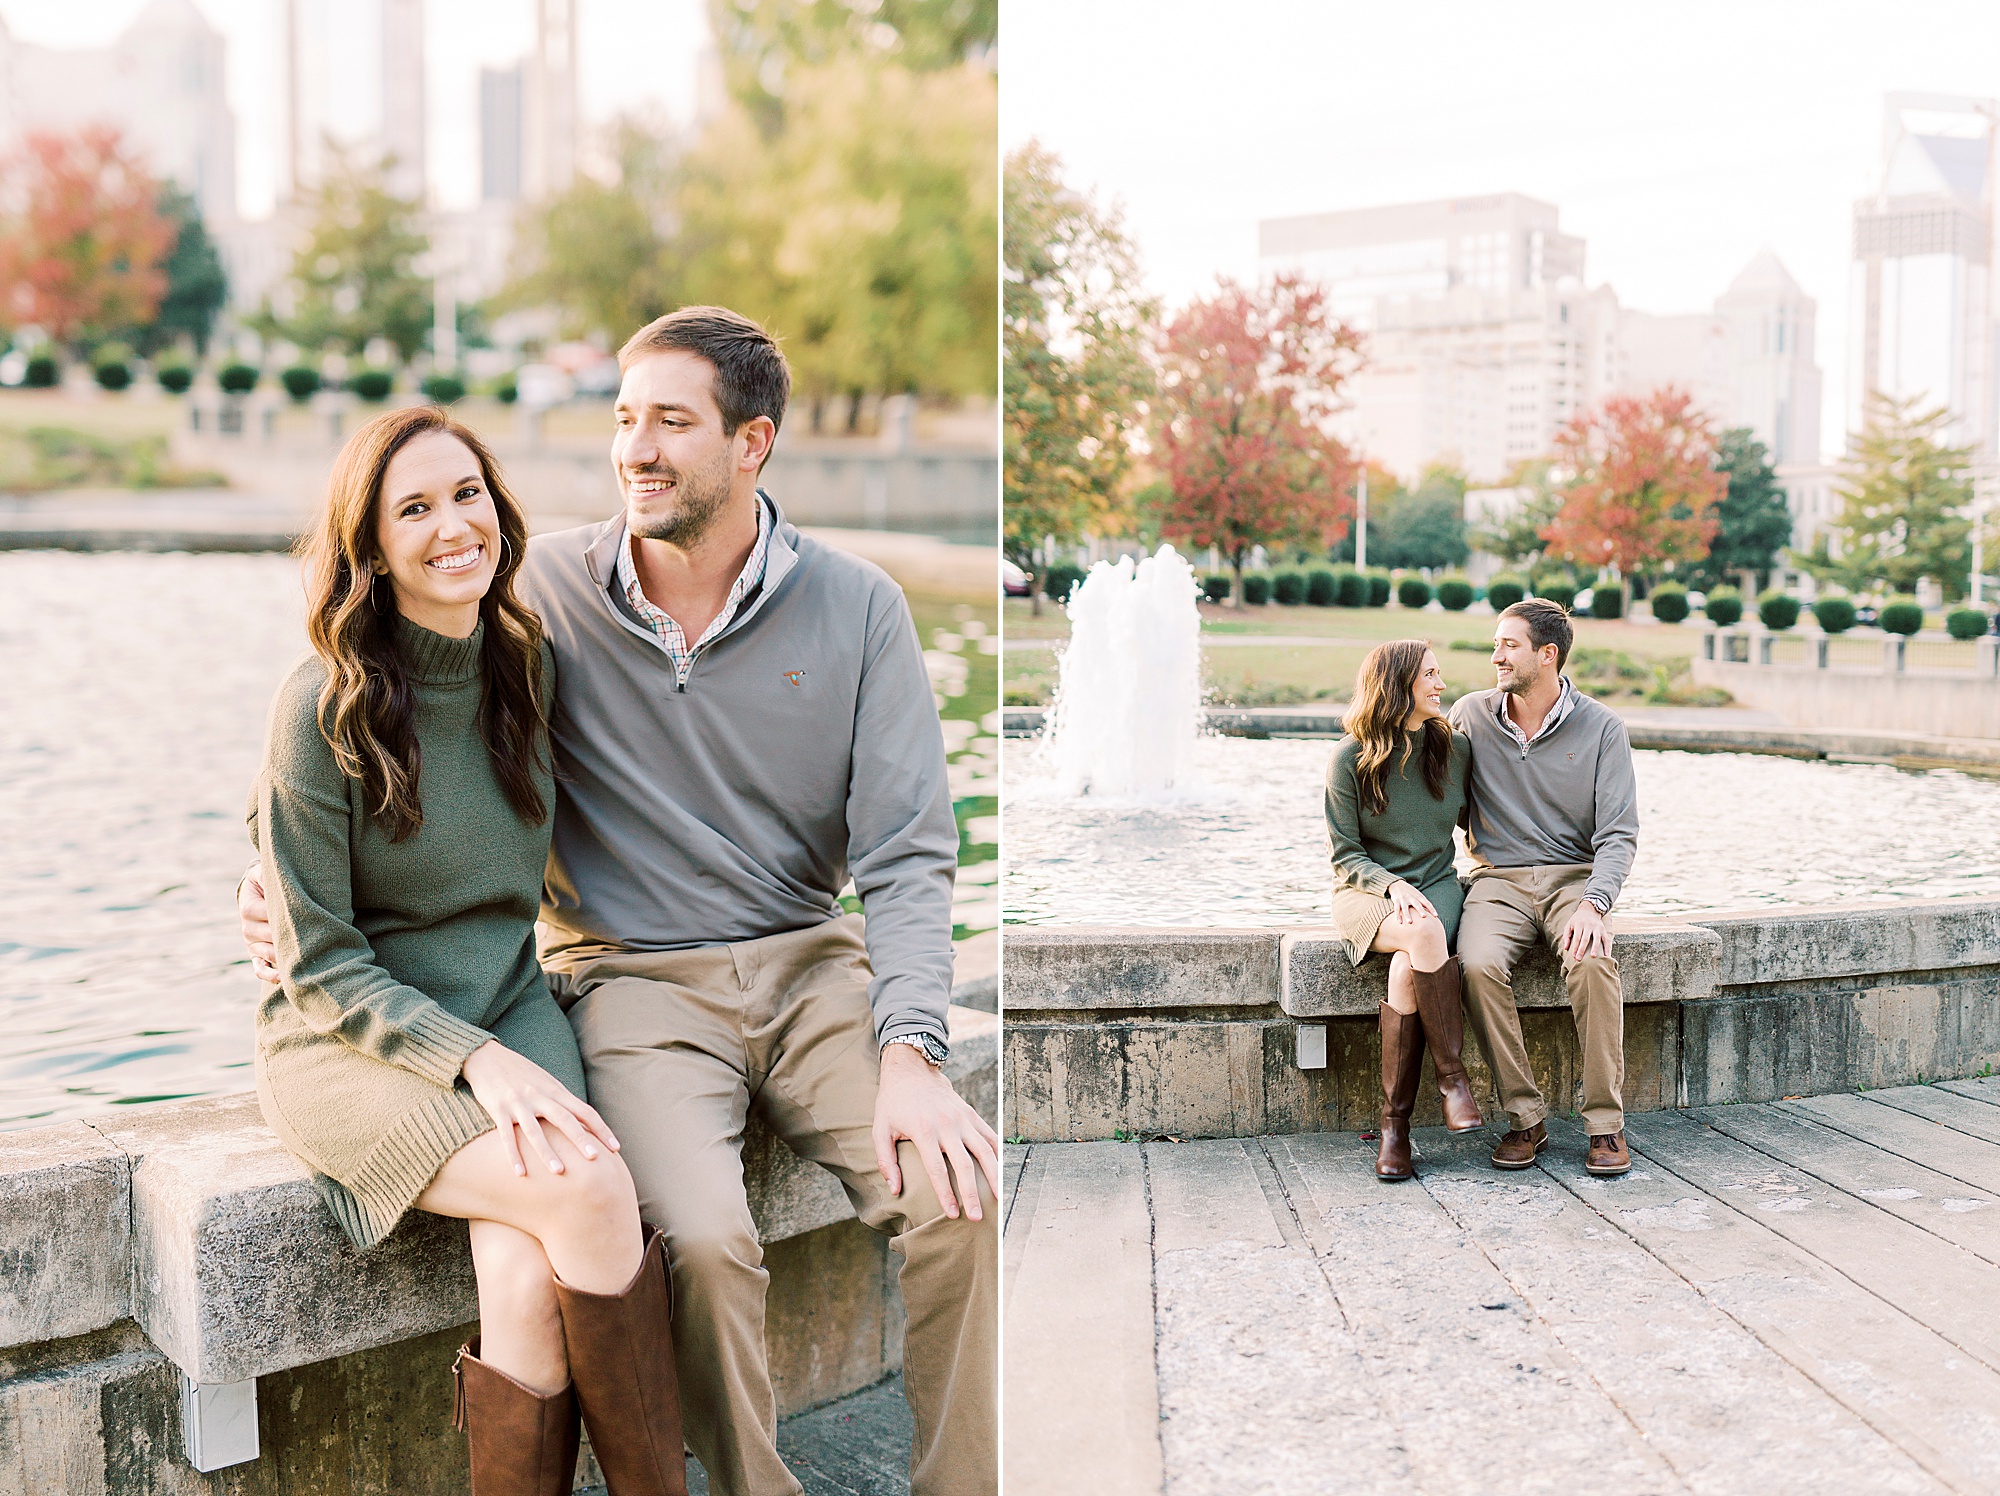 Marshall Park engagement session along fountain